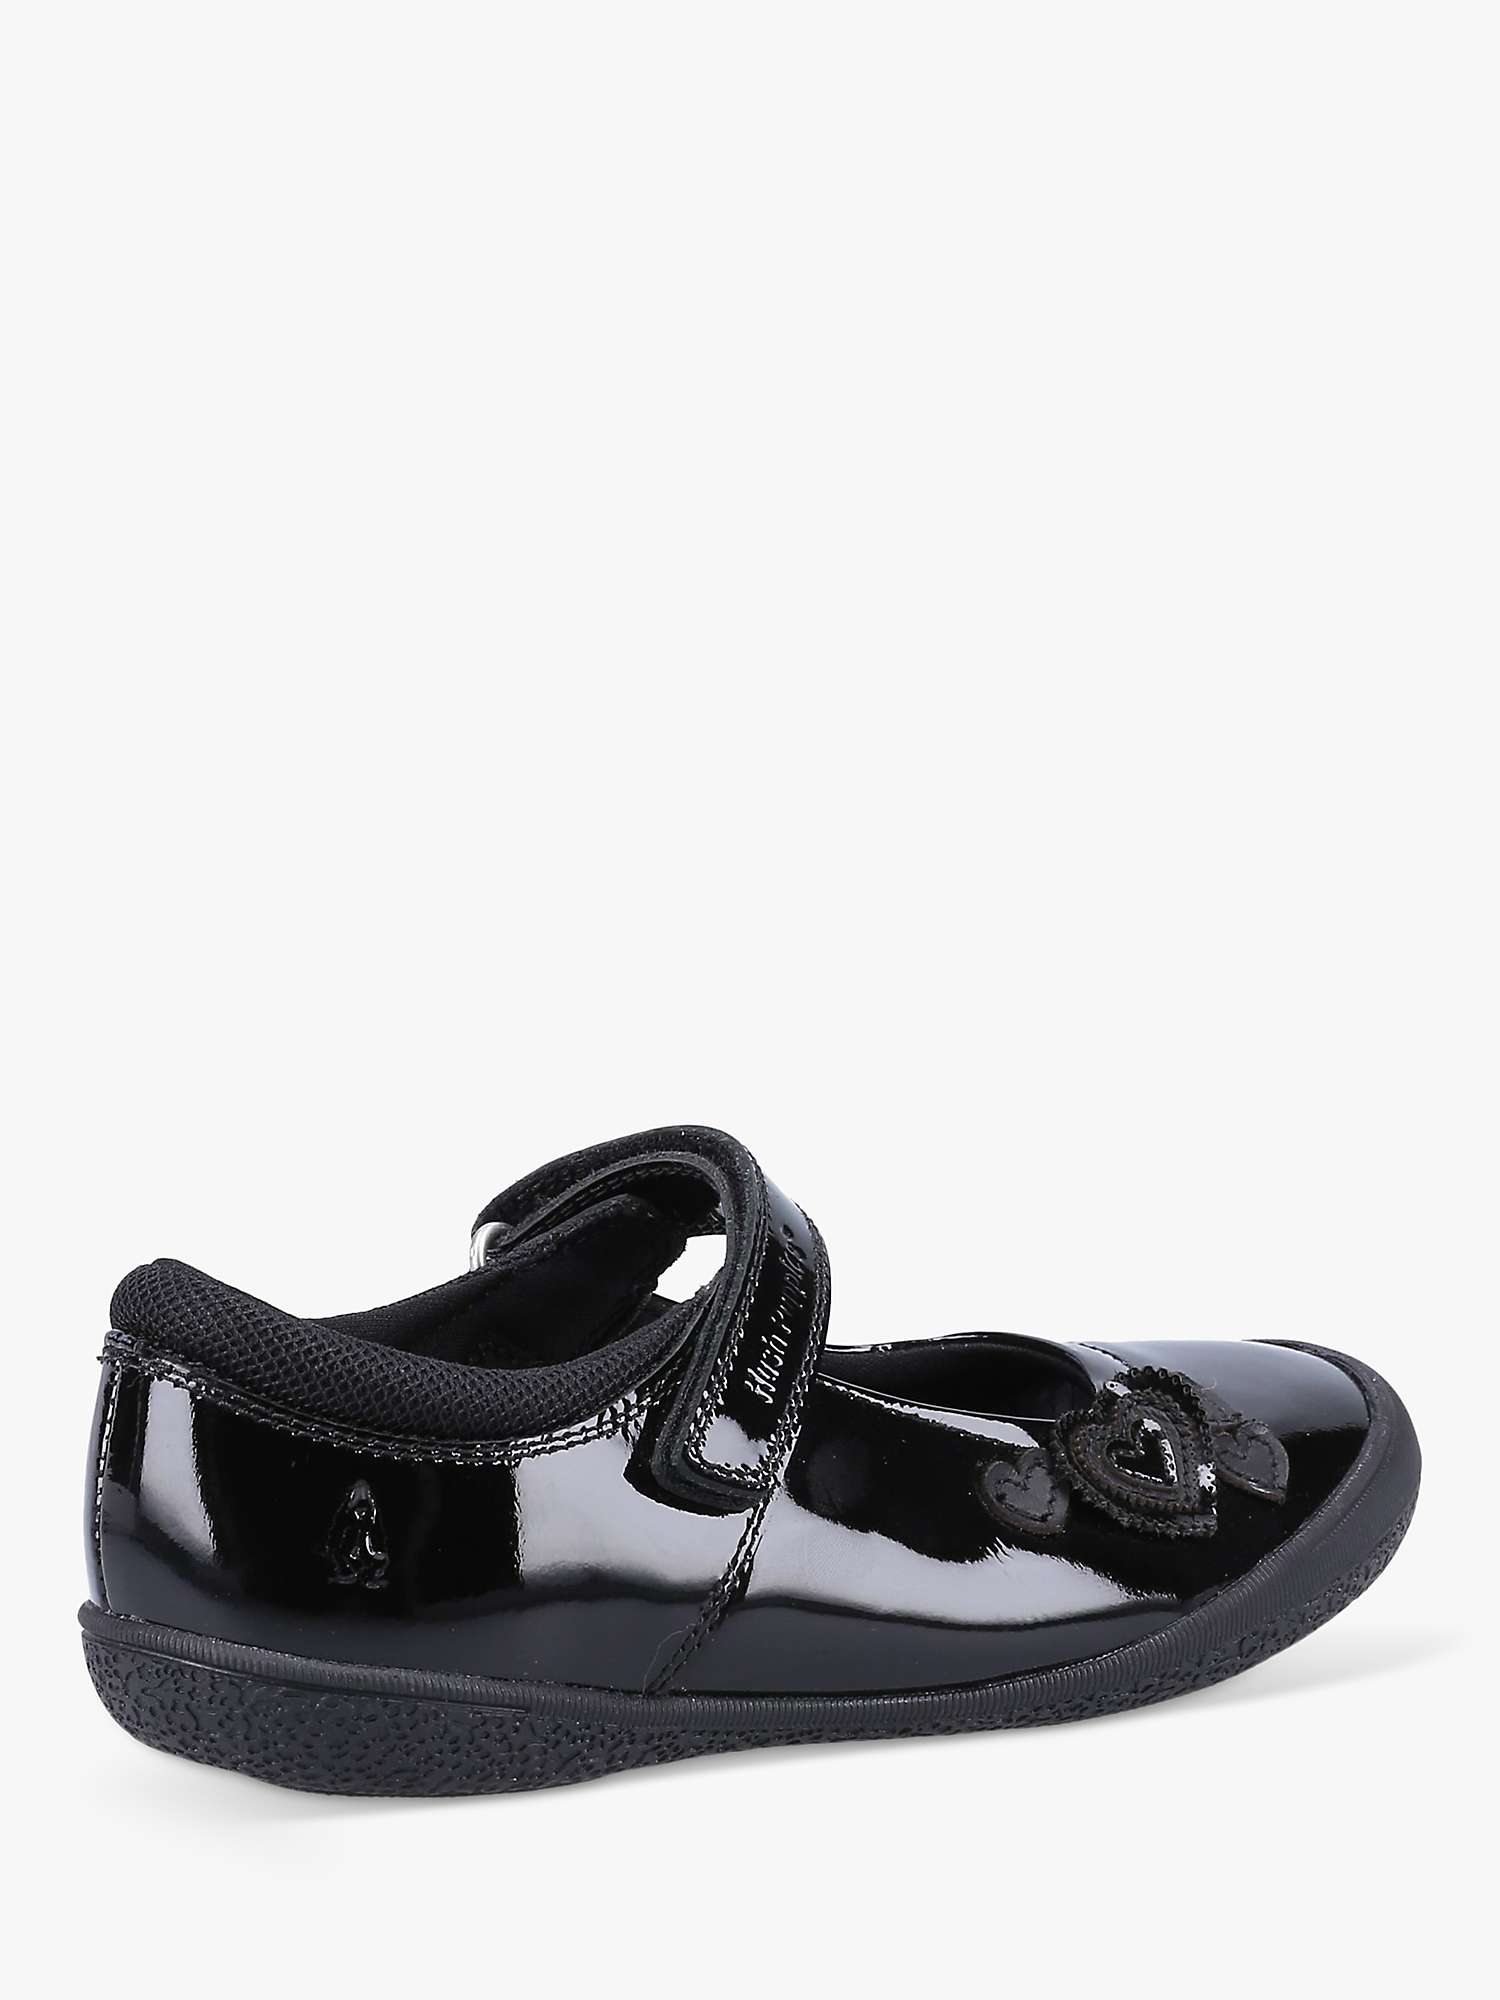 Buy Hush Puppies Kids' Rosanna Leather Mary Jane School Shoes, Black Online at johnlewis.com